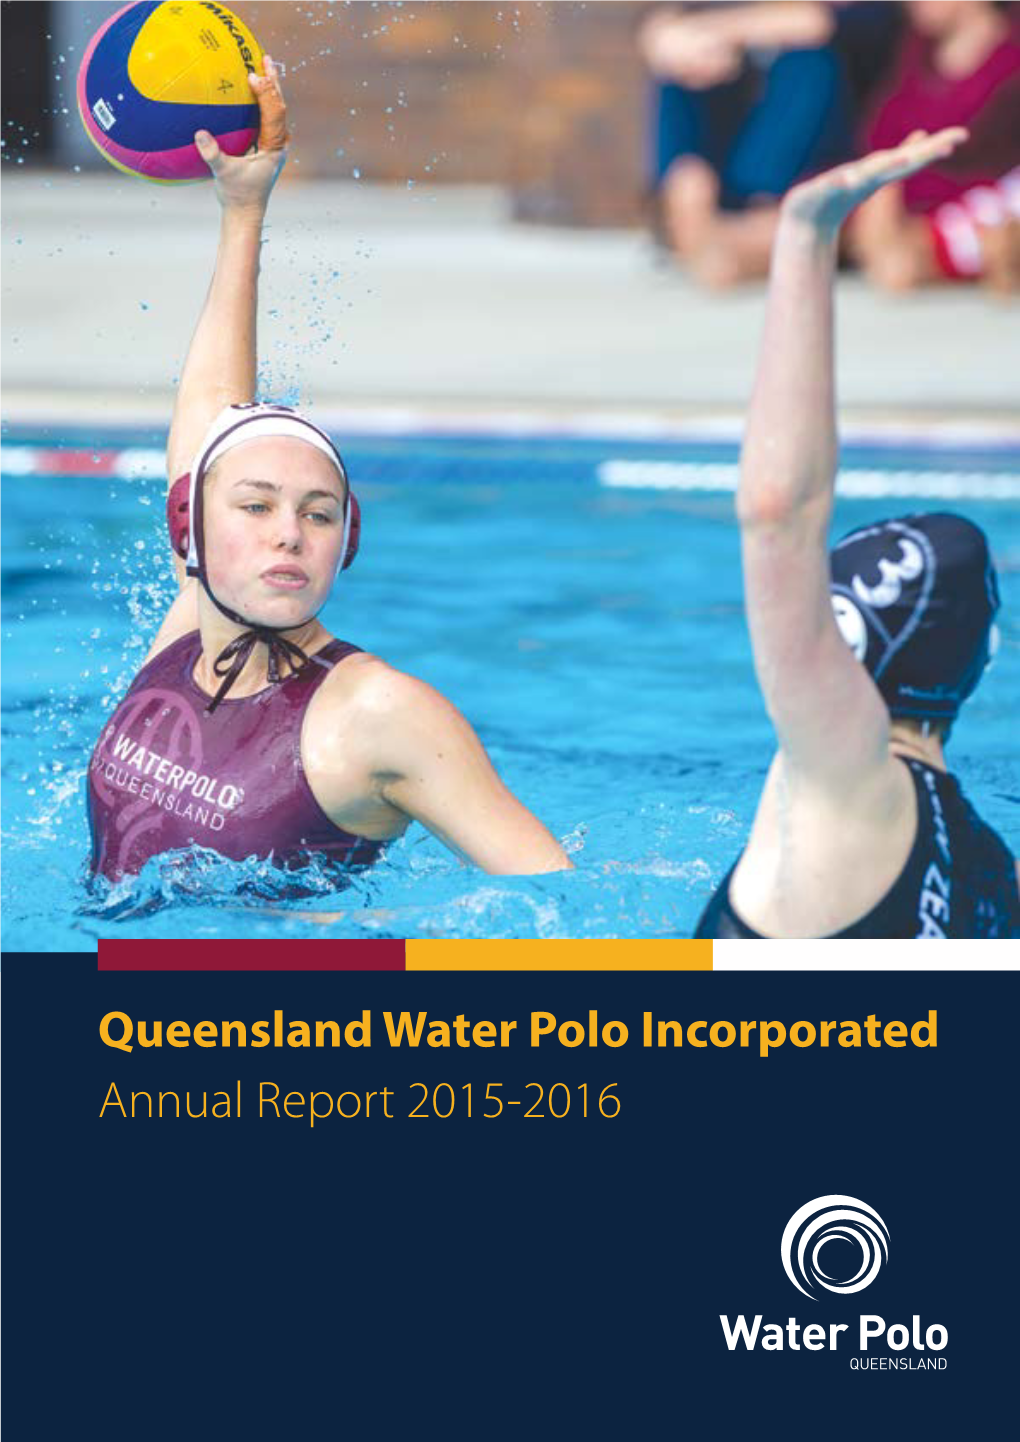 Queensland Water Polo Incorporated Annual Report 2015-2016